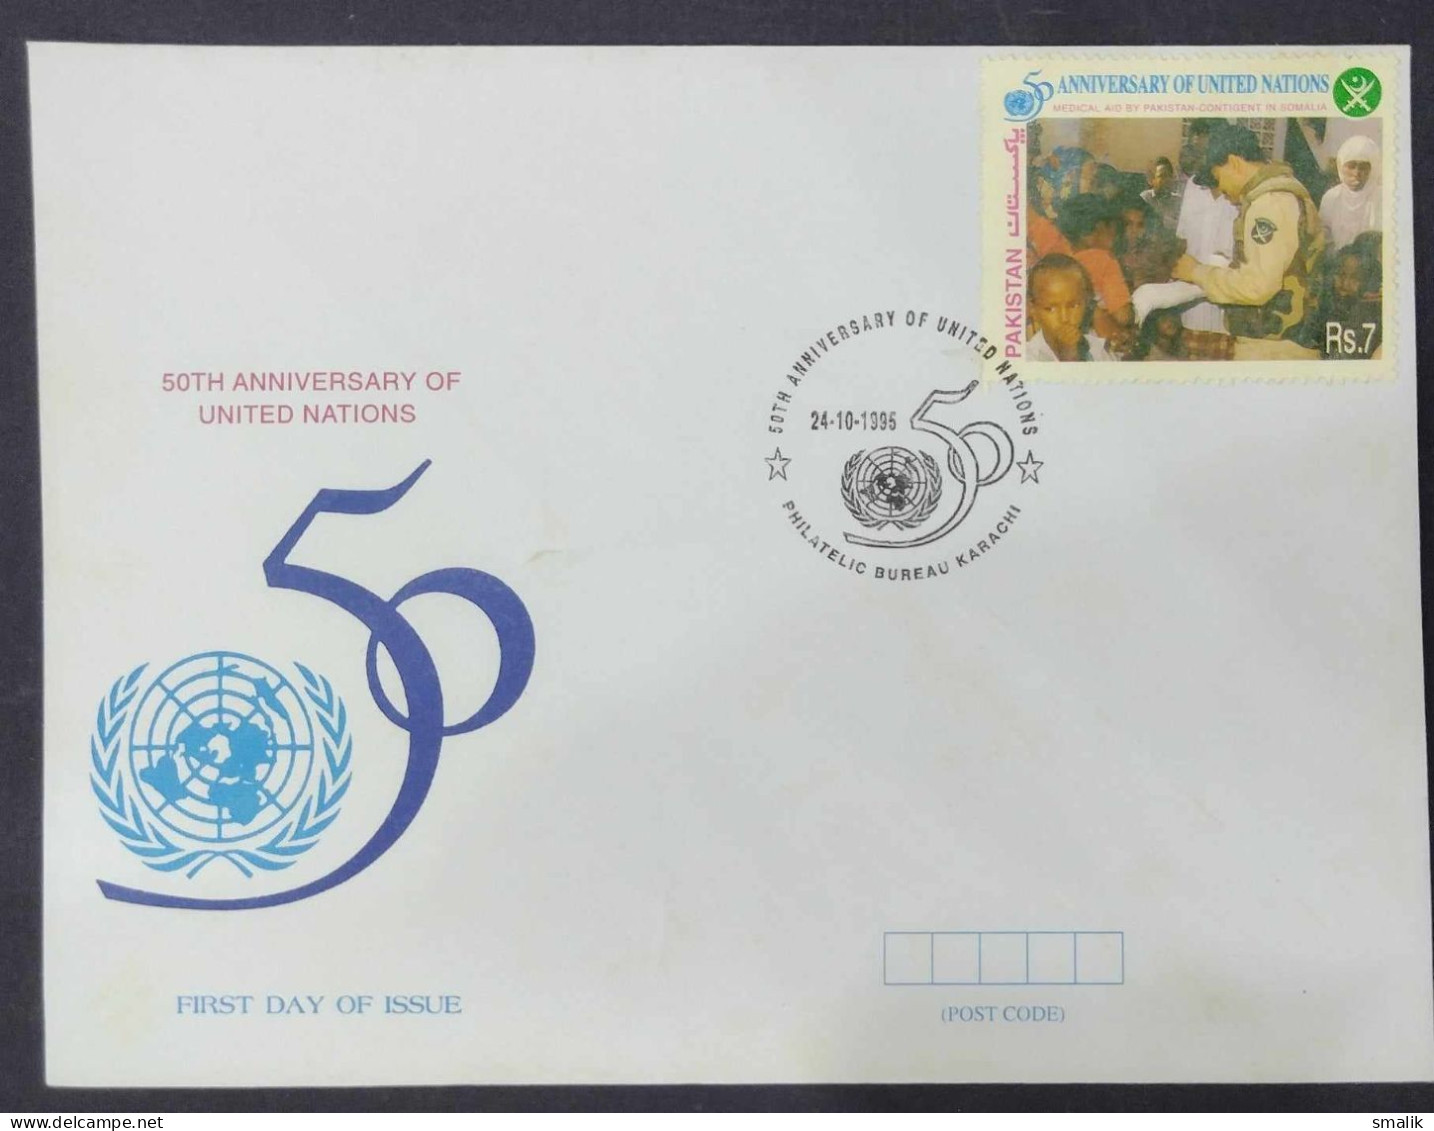 PAKISTAN 1995 FDC - 50th Anniversary Of United Nations, SOMALIA Medical Aidby Pakistan Army, First Day Cover - Pakistan